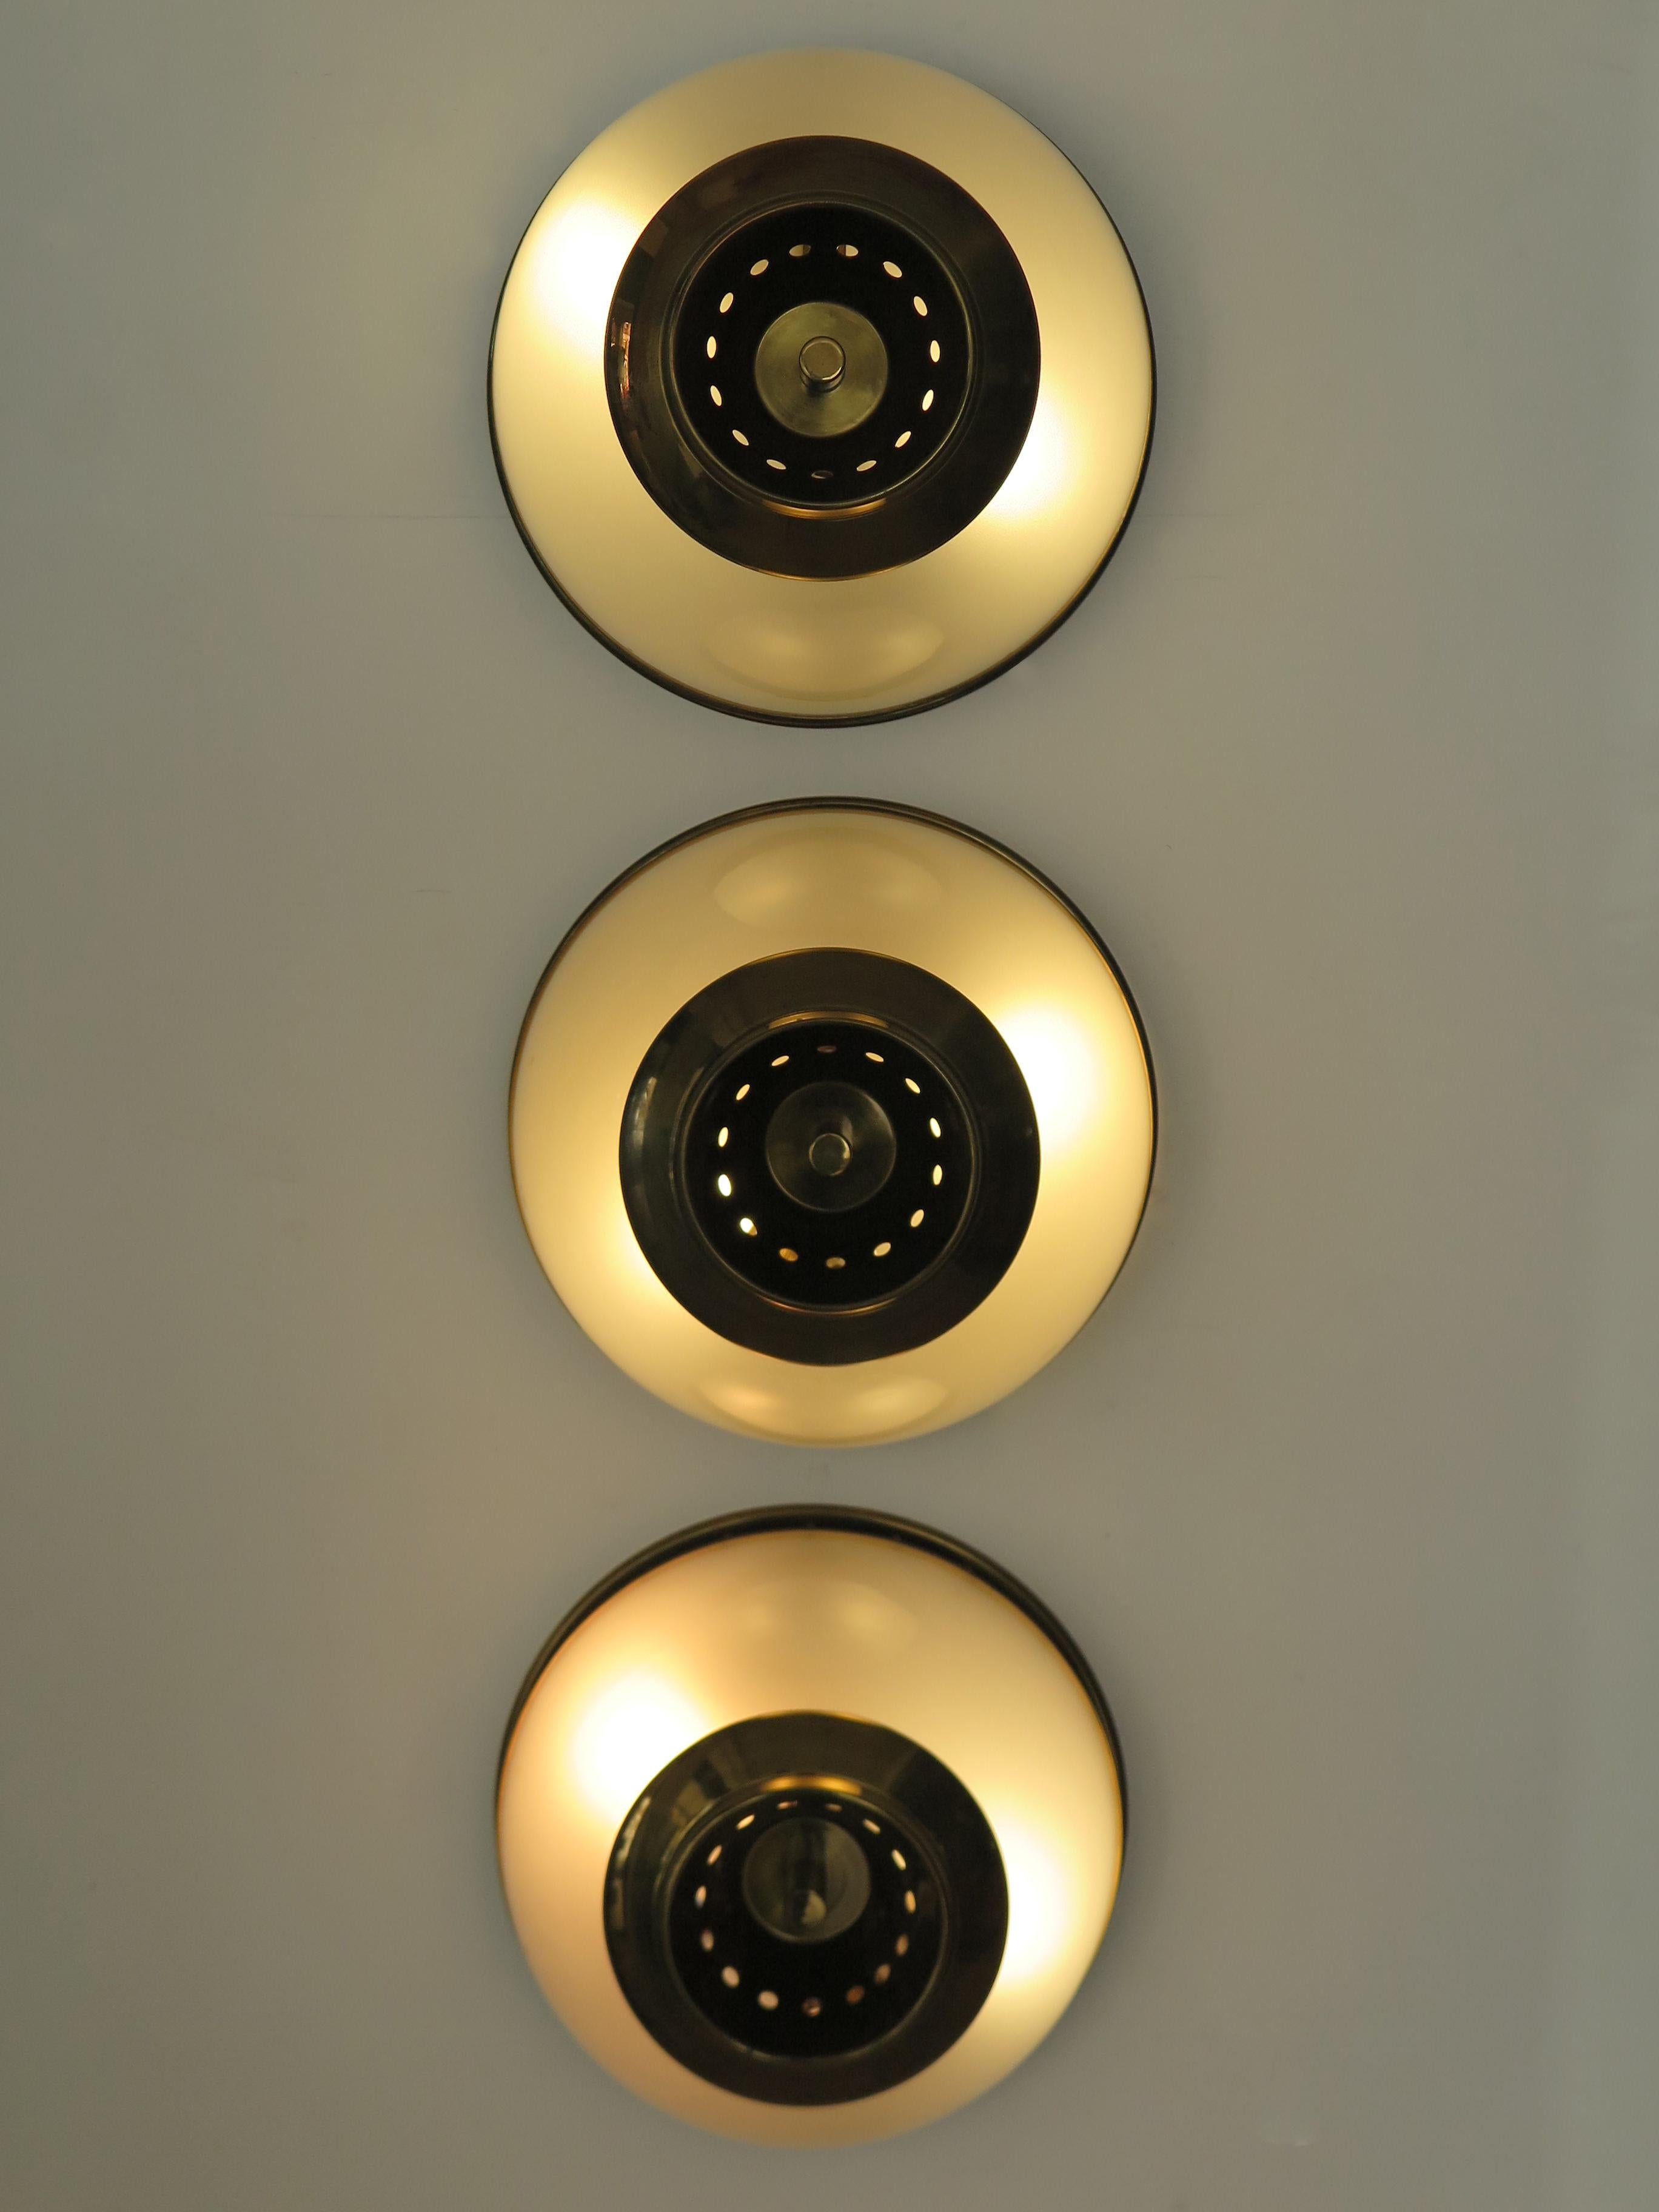 Italian midcentury modern design set of three scones wall lamps or ceiling lamps designed by Luigi Caccia Dominioni (Milan 1913 - Milan 2016 ) and produced by Azucena with brass frame and details and half globe in frosted glass internally, Italy